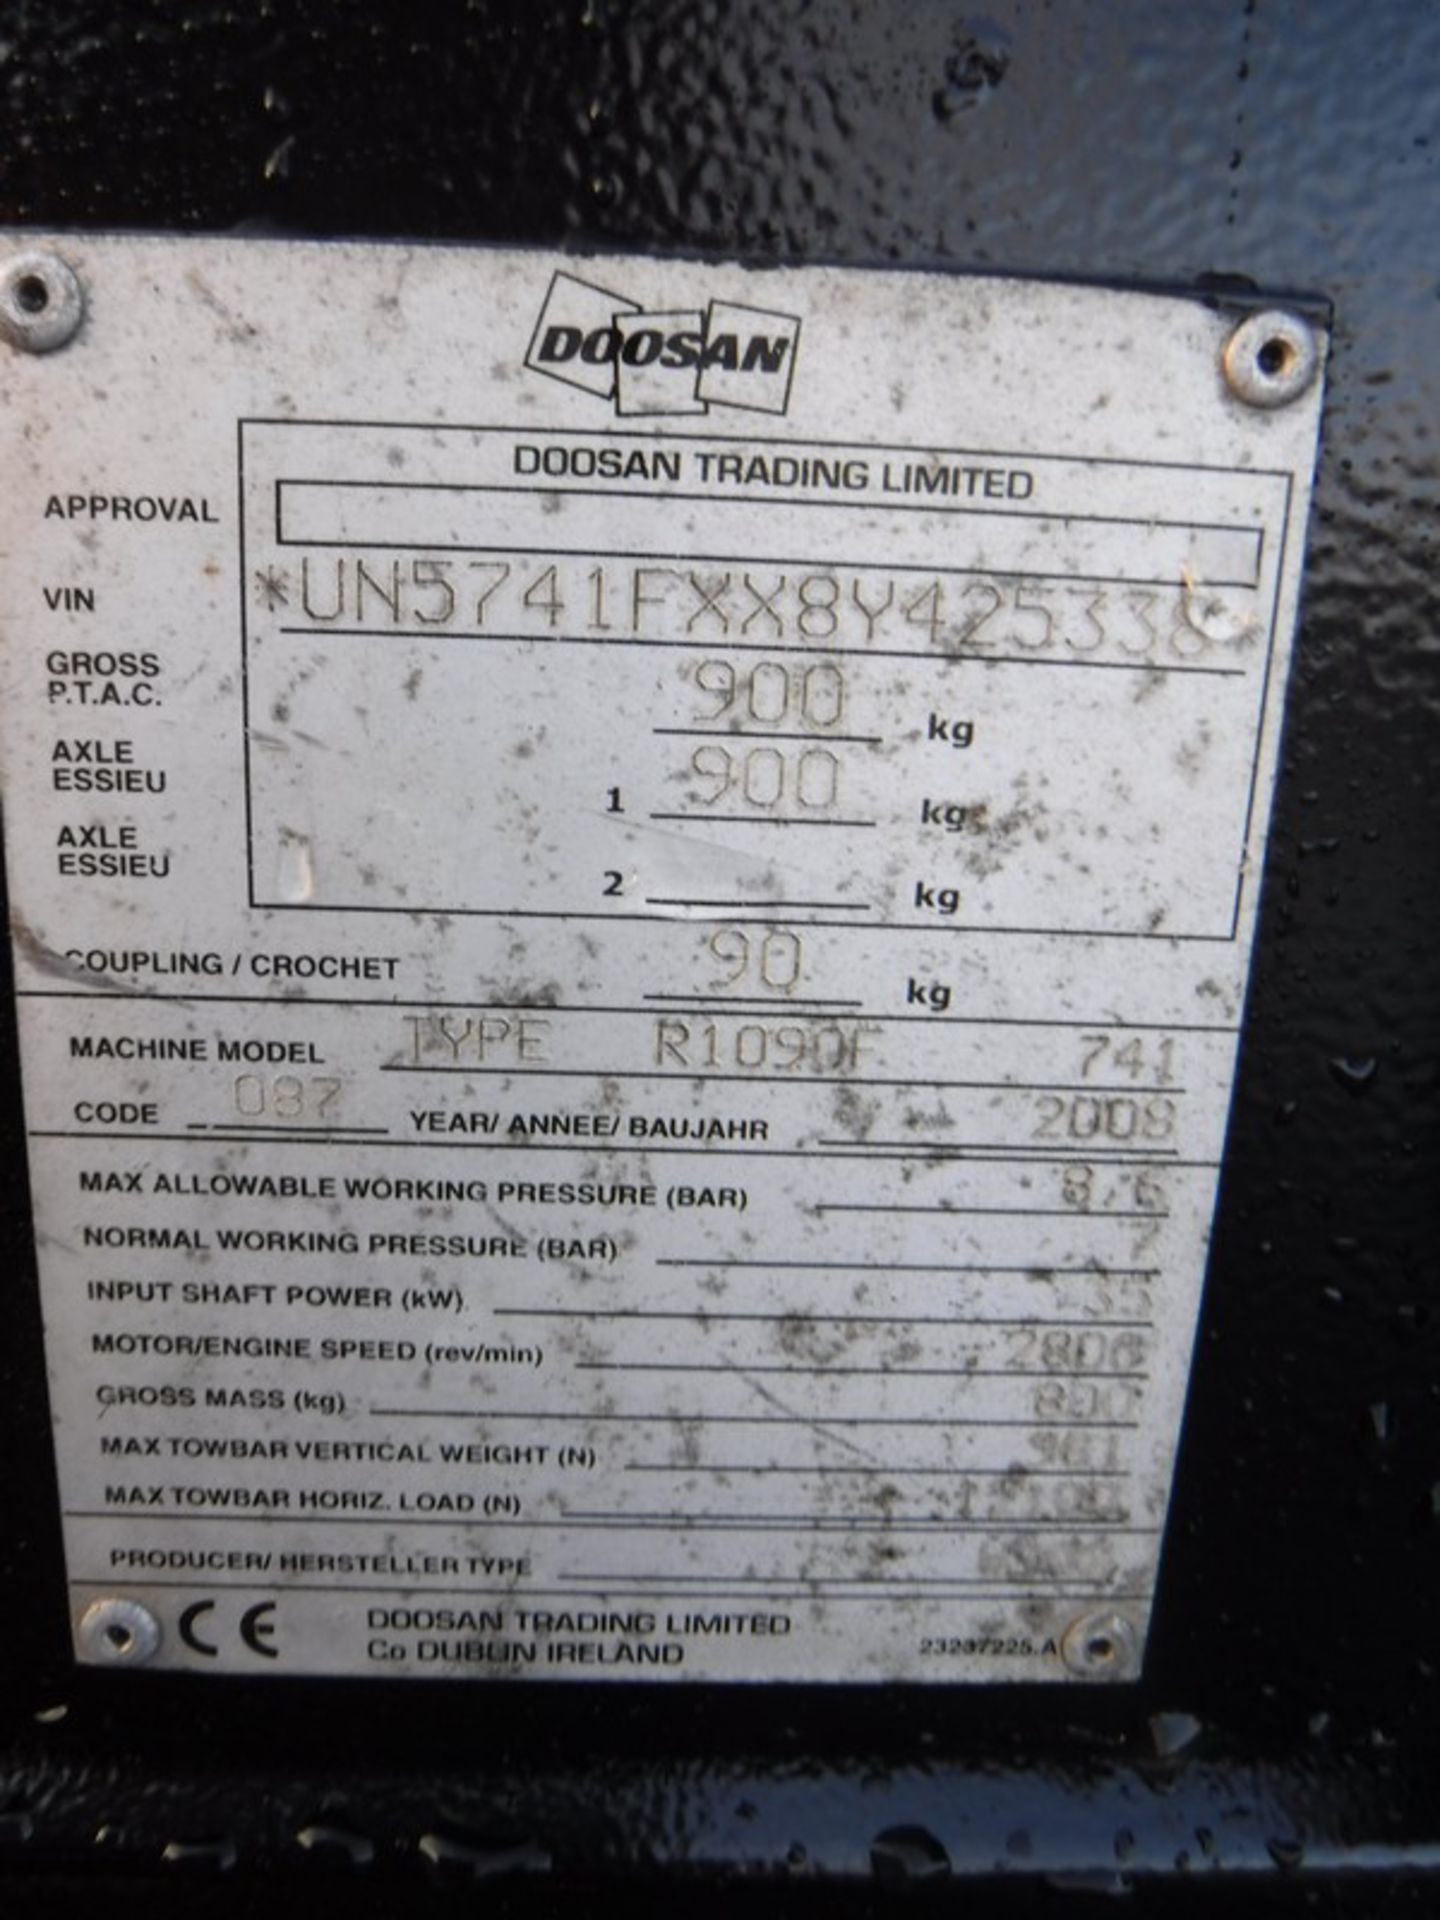 2008 INGERSOL RAND 2 tool compressor, S/N UN5741FXX8Y425338, 1320 hrs (not verified) - Image 6 of 6